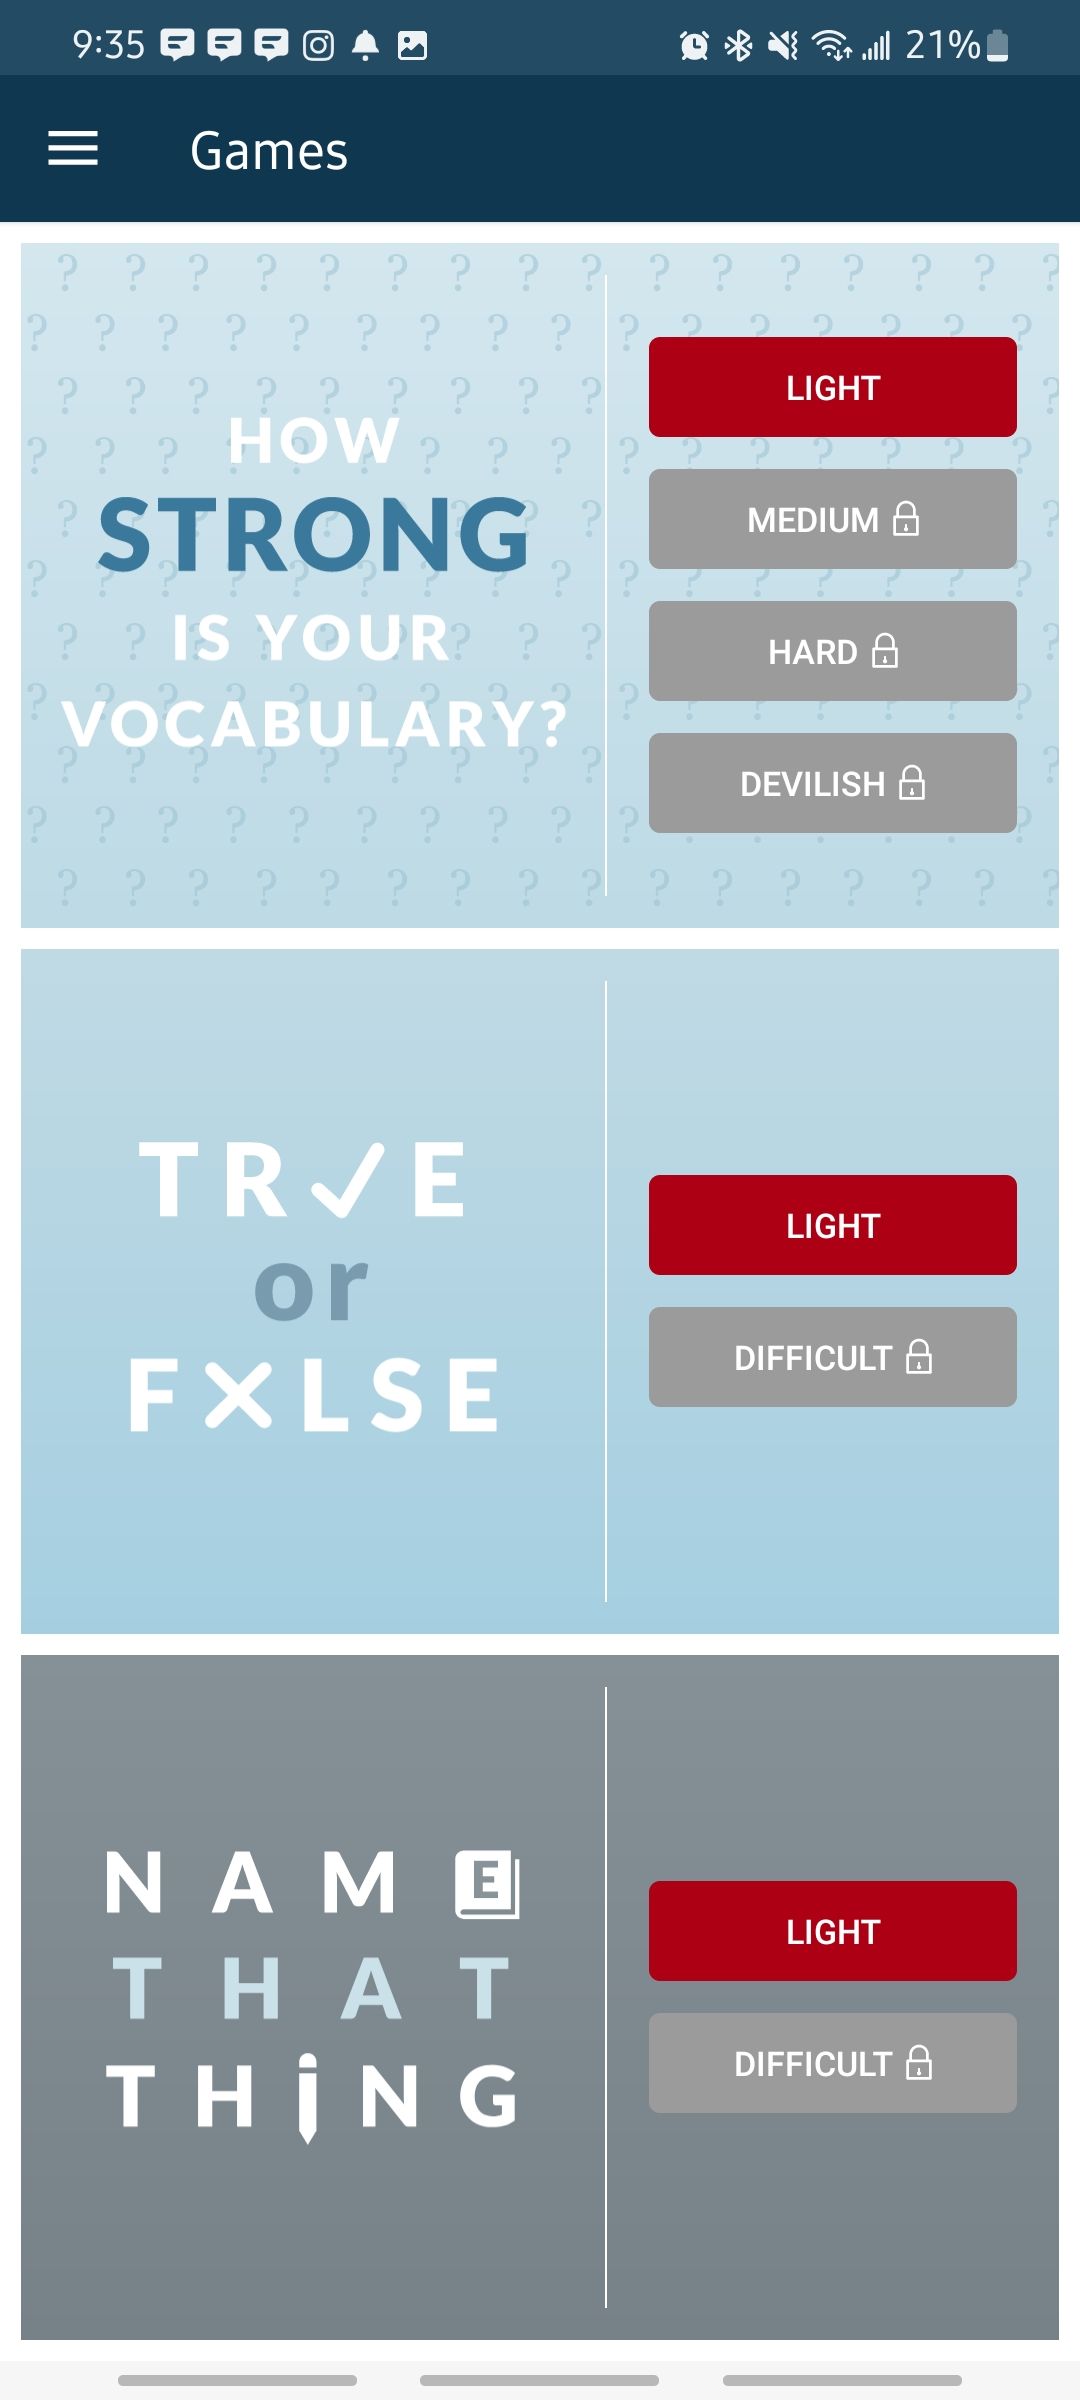 Three word based games in the Merriam-Webster Dictionary app games tab